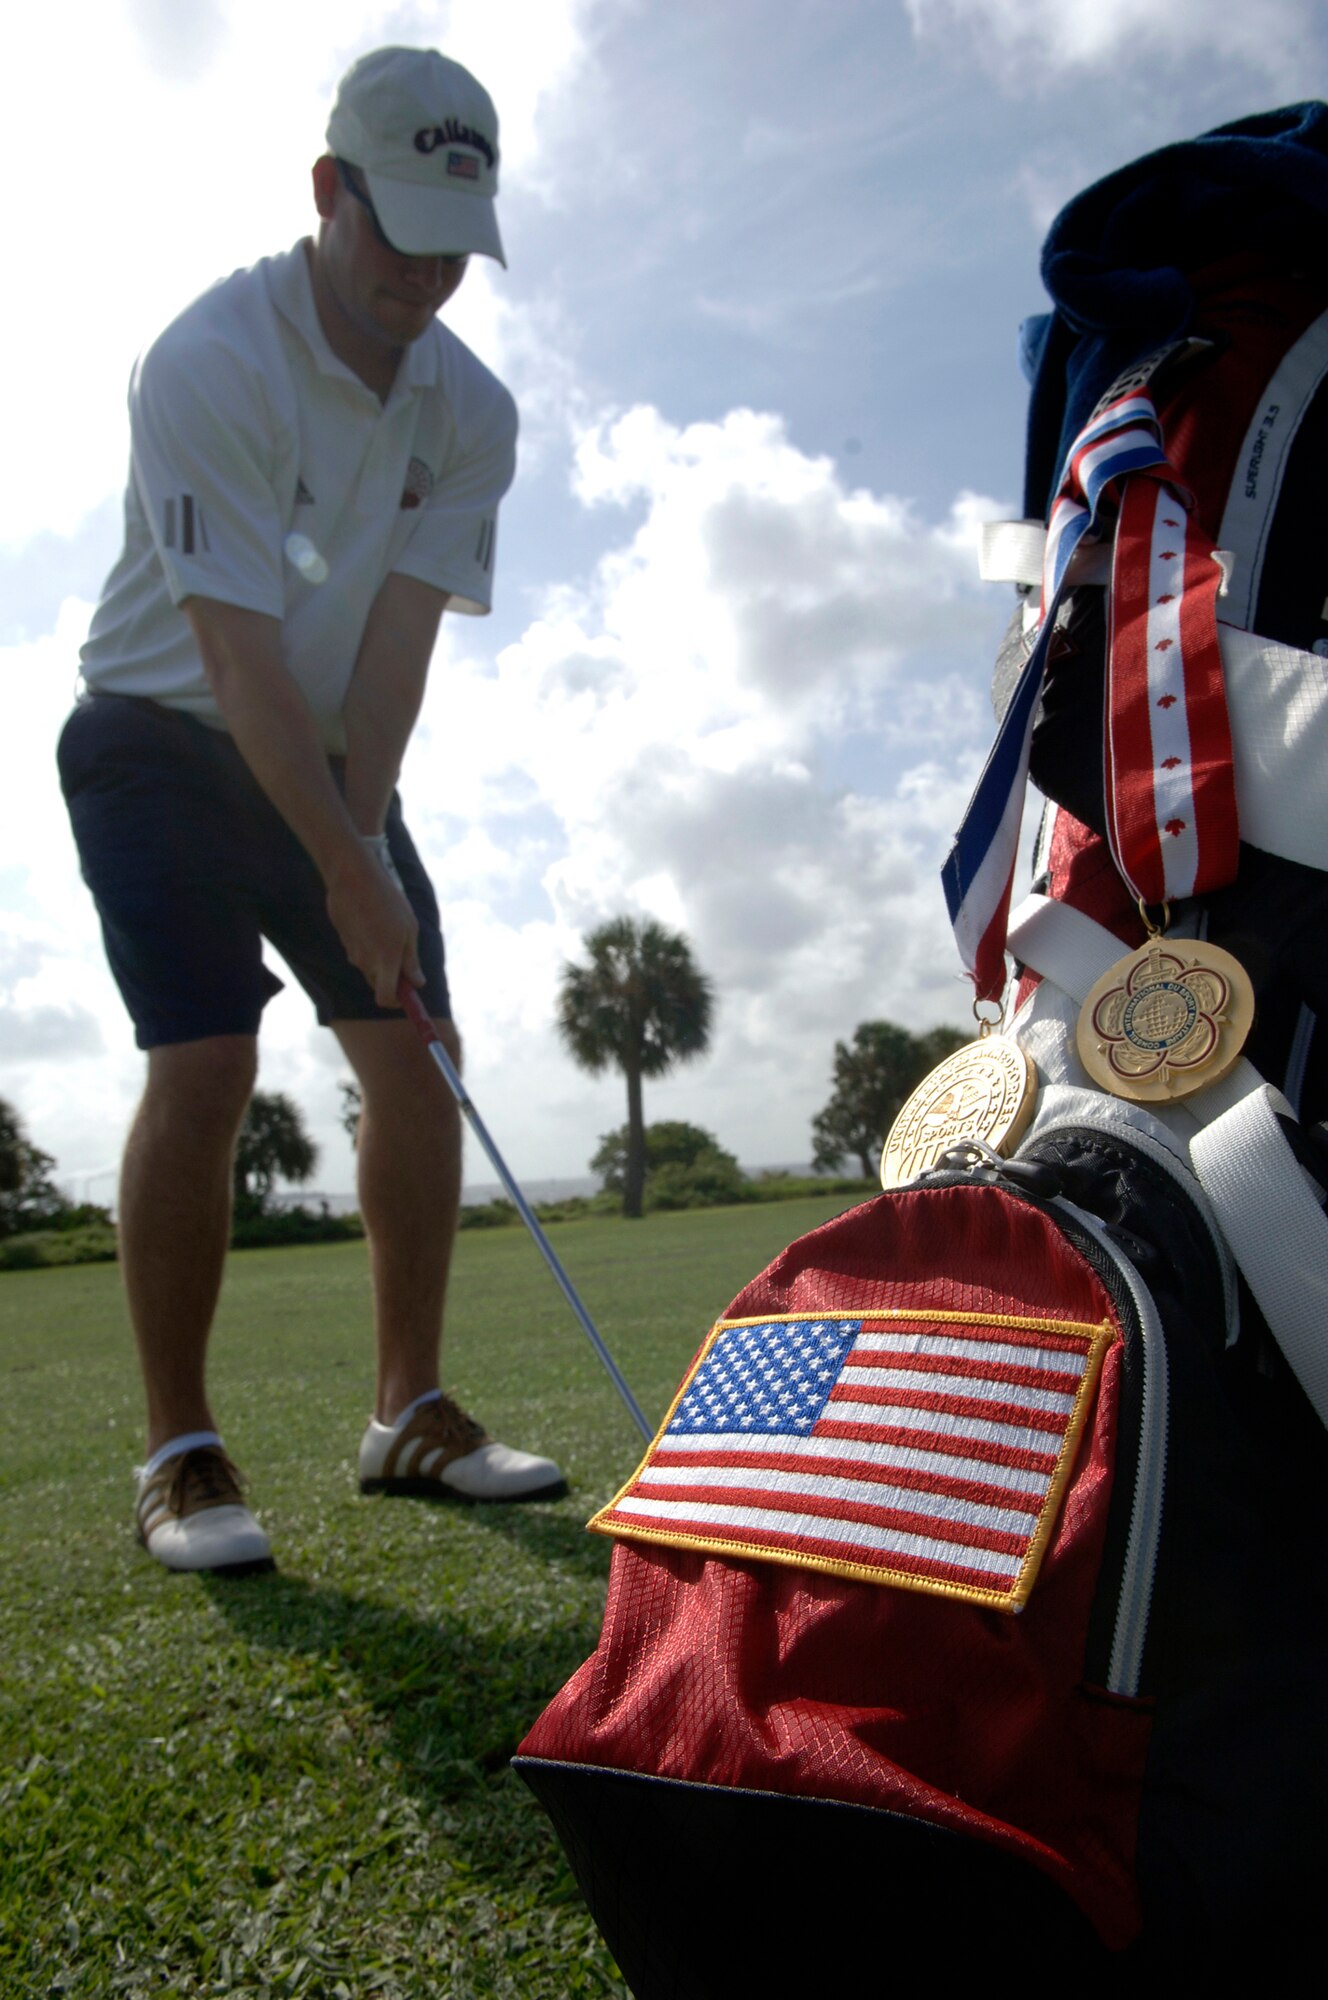 U.S. Air Force A1C John Little practices his gold swing at MacDill AFB September 02, 2008.  A1C Little has won two gold medals for the MacDill golf team.  
  (U.S. Air Force photo by Amn Kate Benoy) (Released)